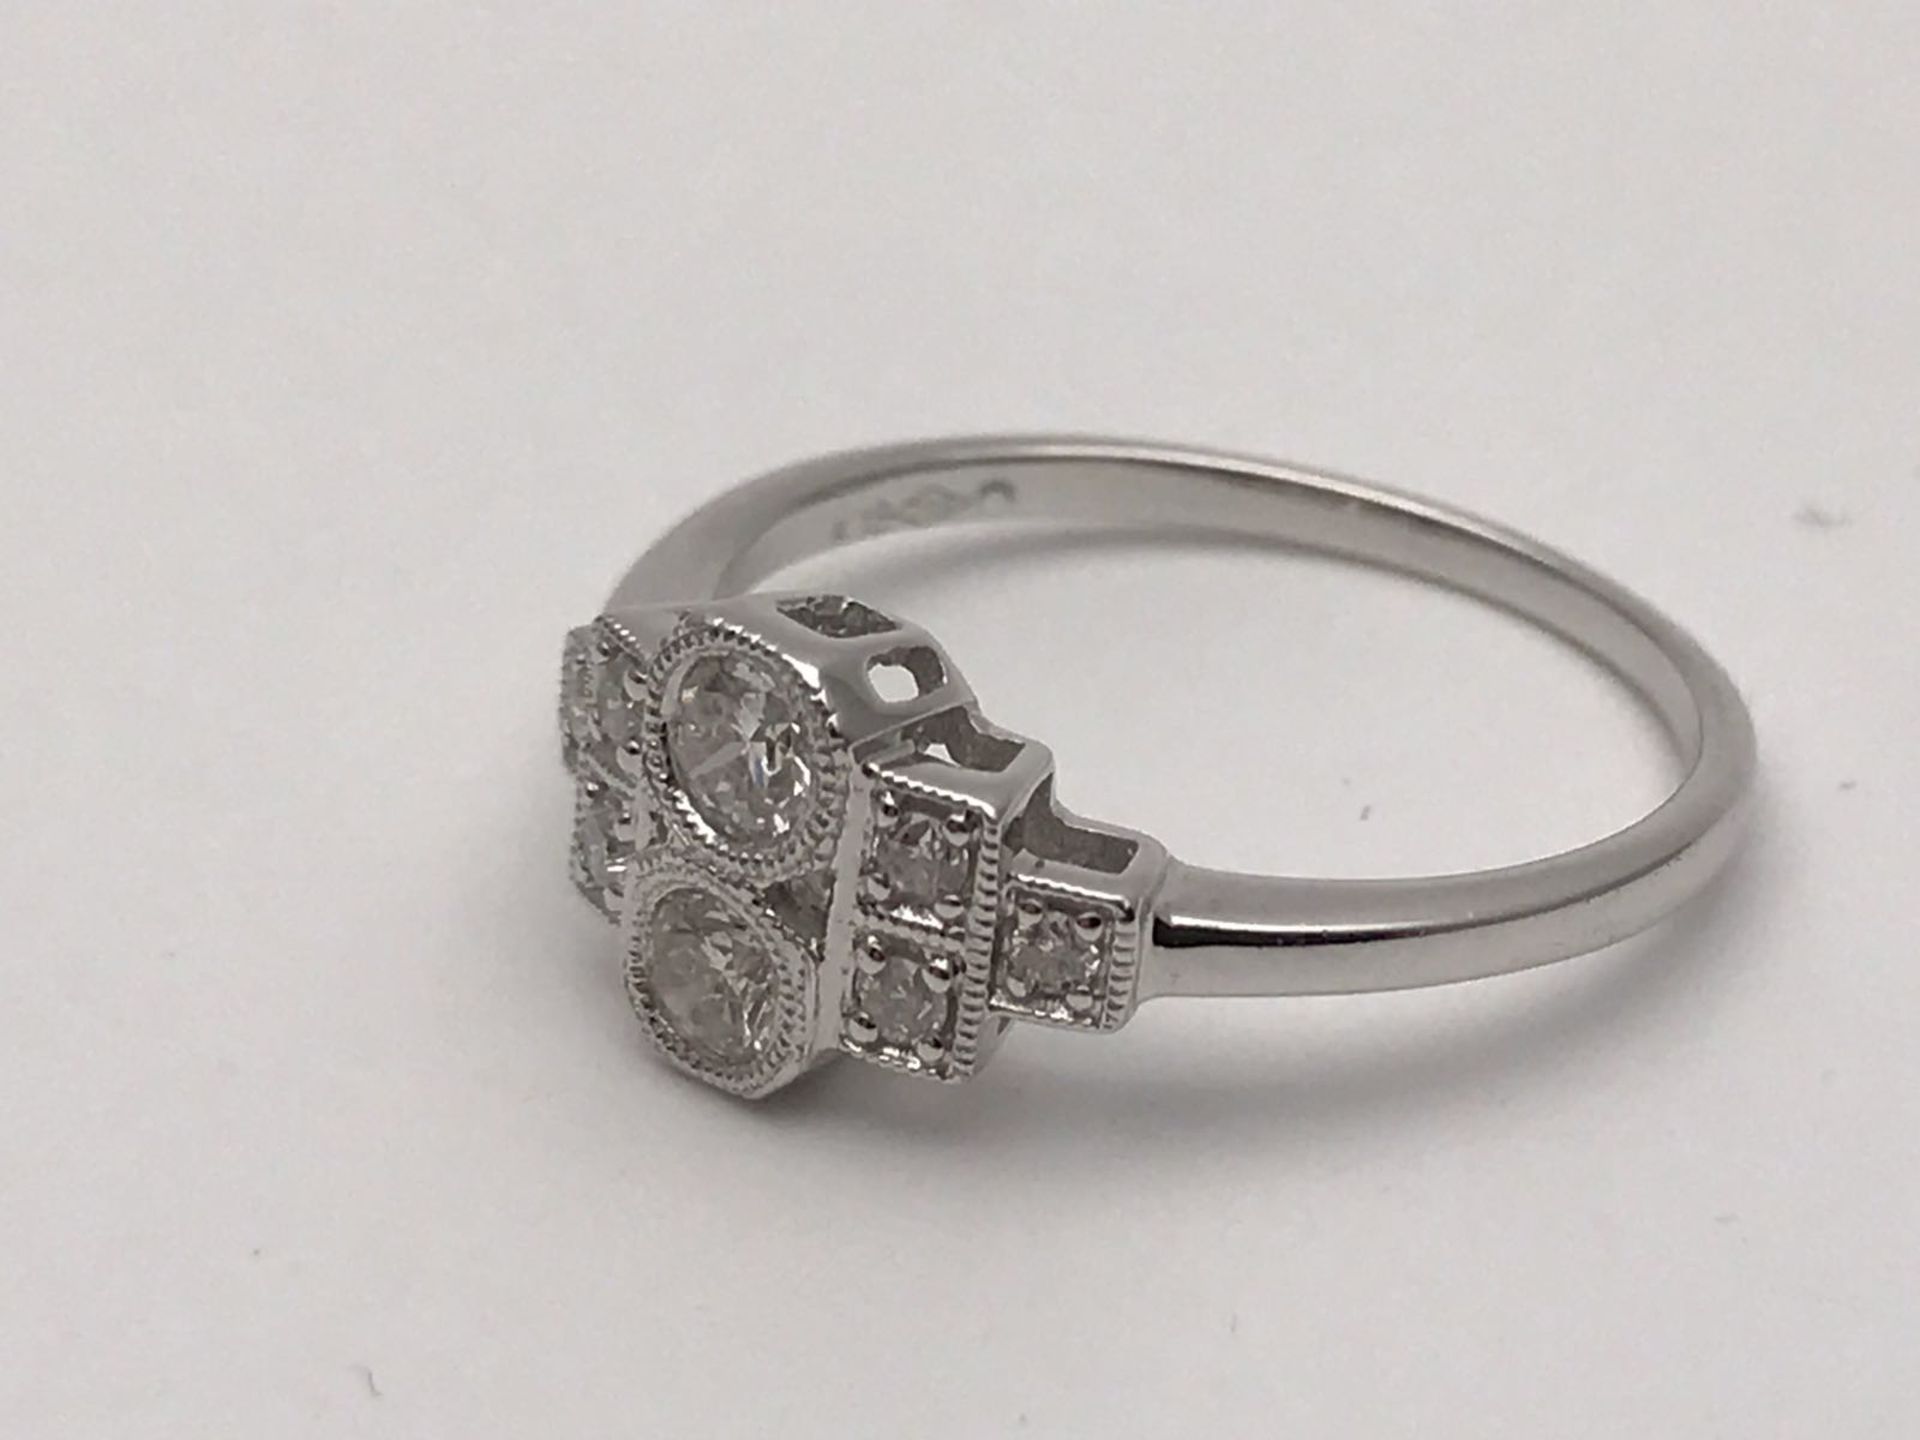 RRP £3000 A STUNNING WHITE GOLD DIAMOND RING COMPRISING 8 BRILLIANT ROUND DIAMONDS OF TOP QUALITY- - Image 4 of 4